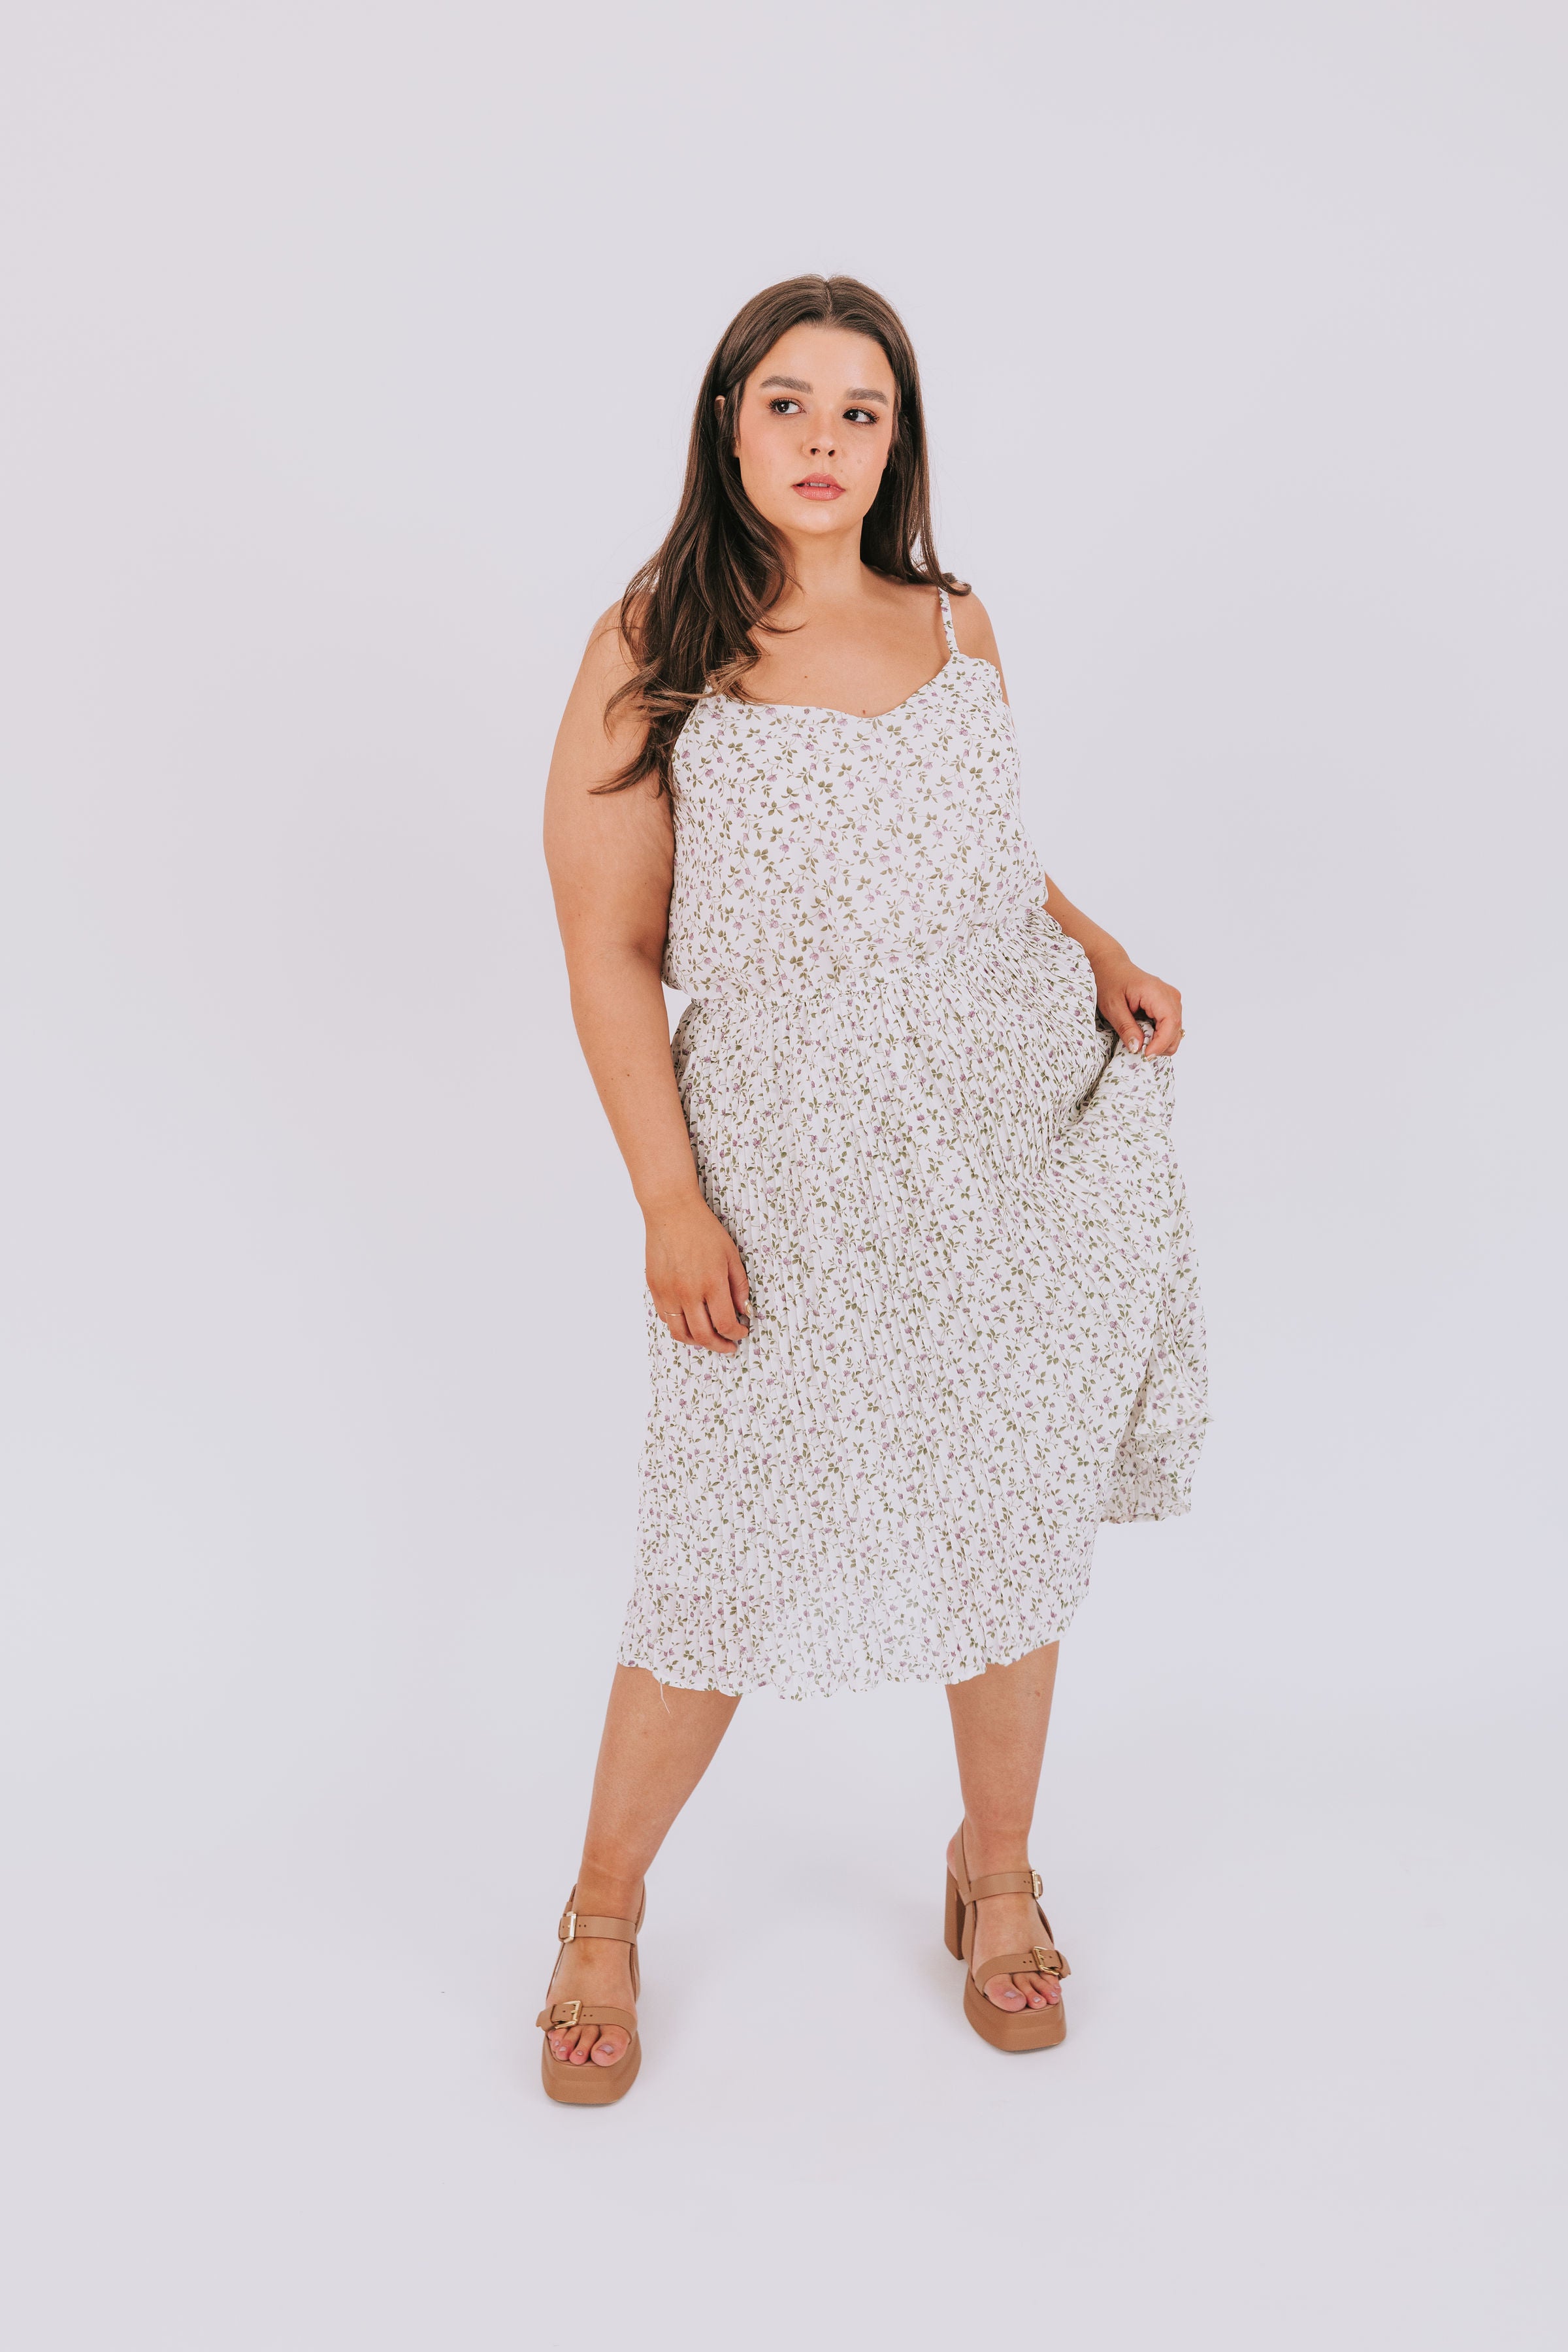 PLUS SIZE - For Now Dress